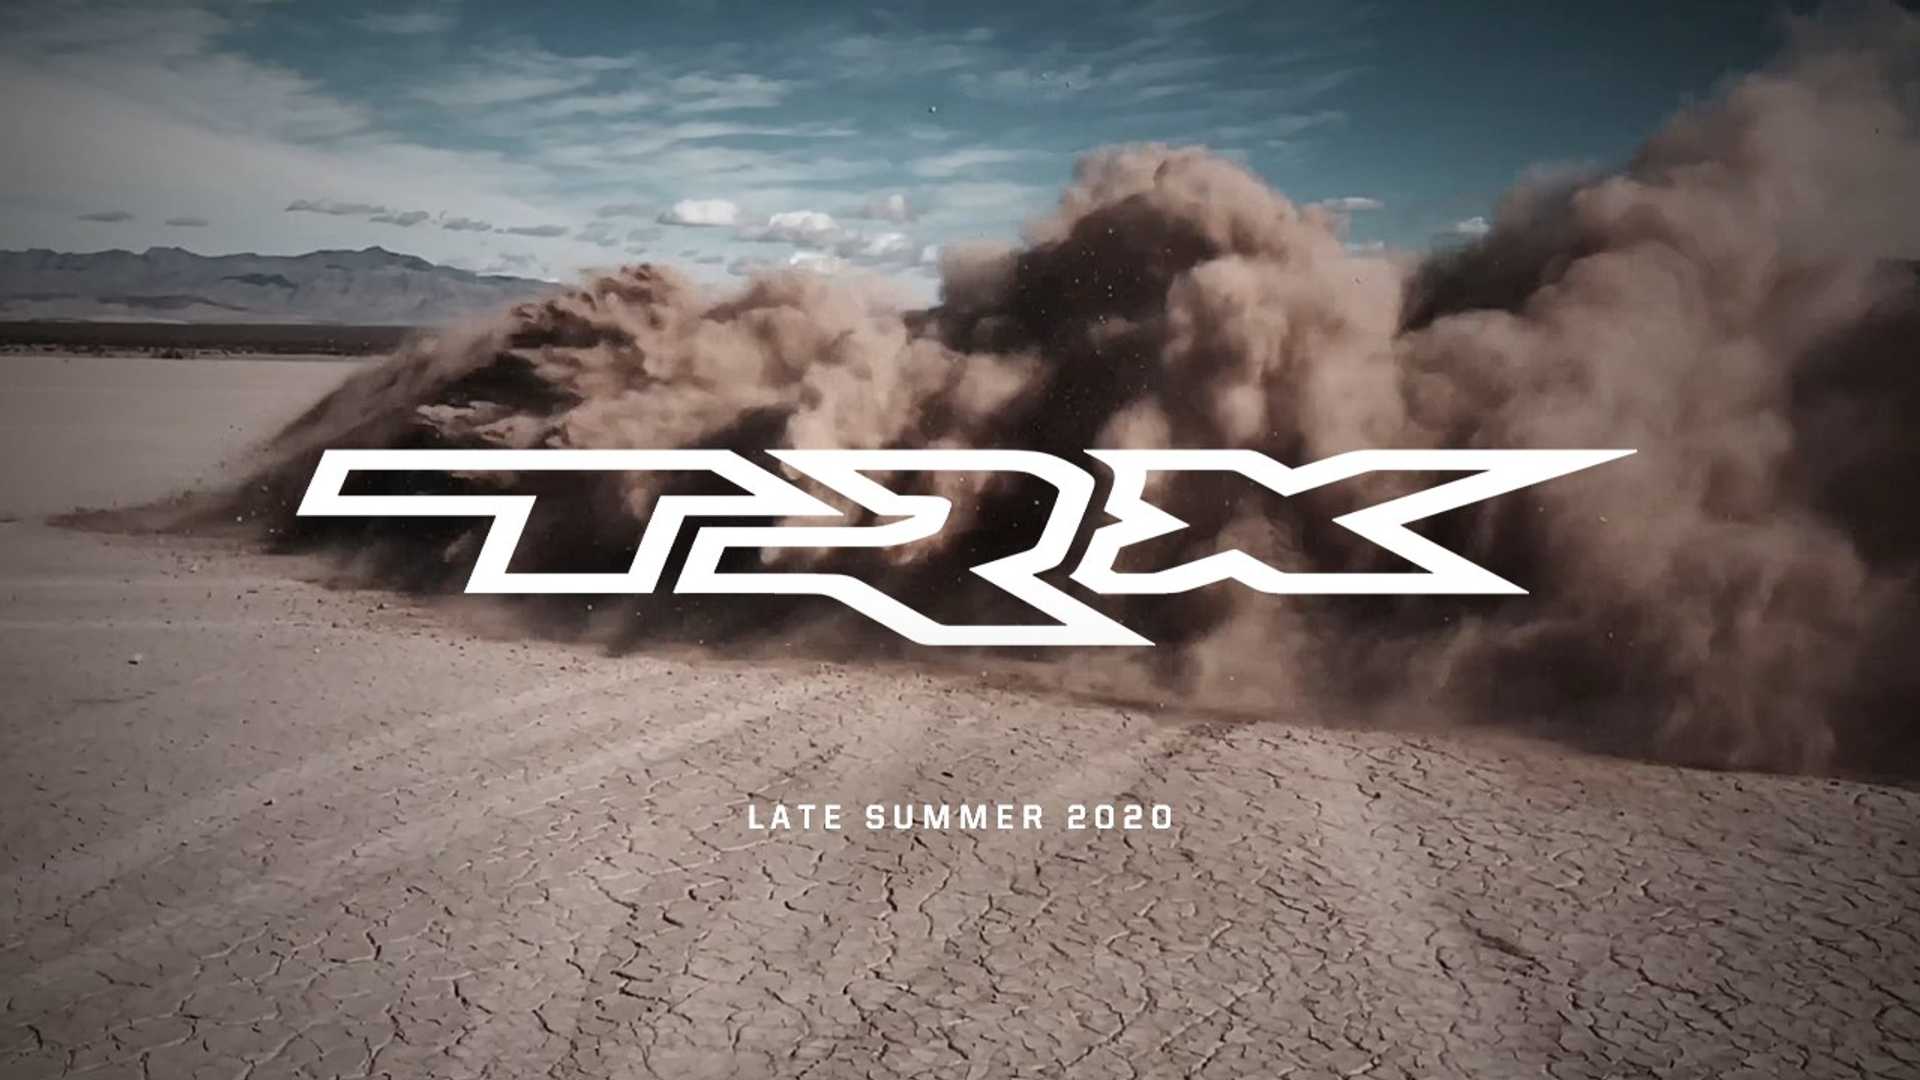 Ram TRX Coming This Summer, According To Facebook Teaser